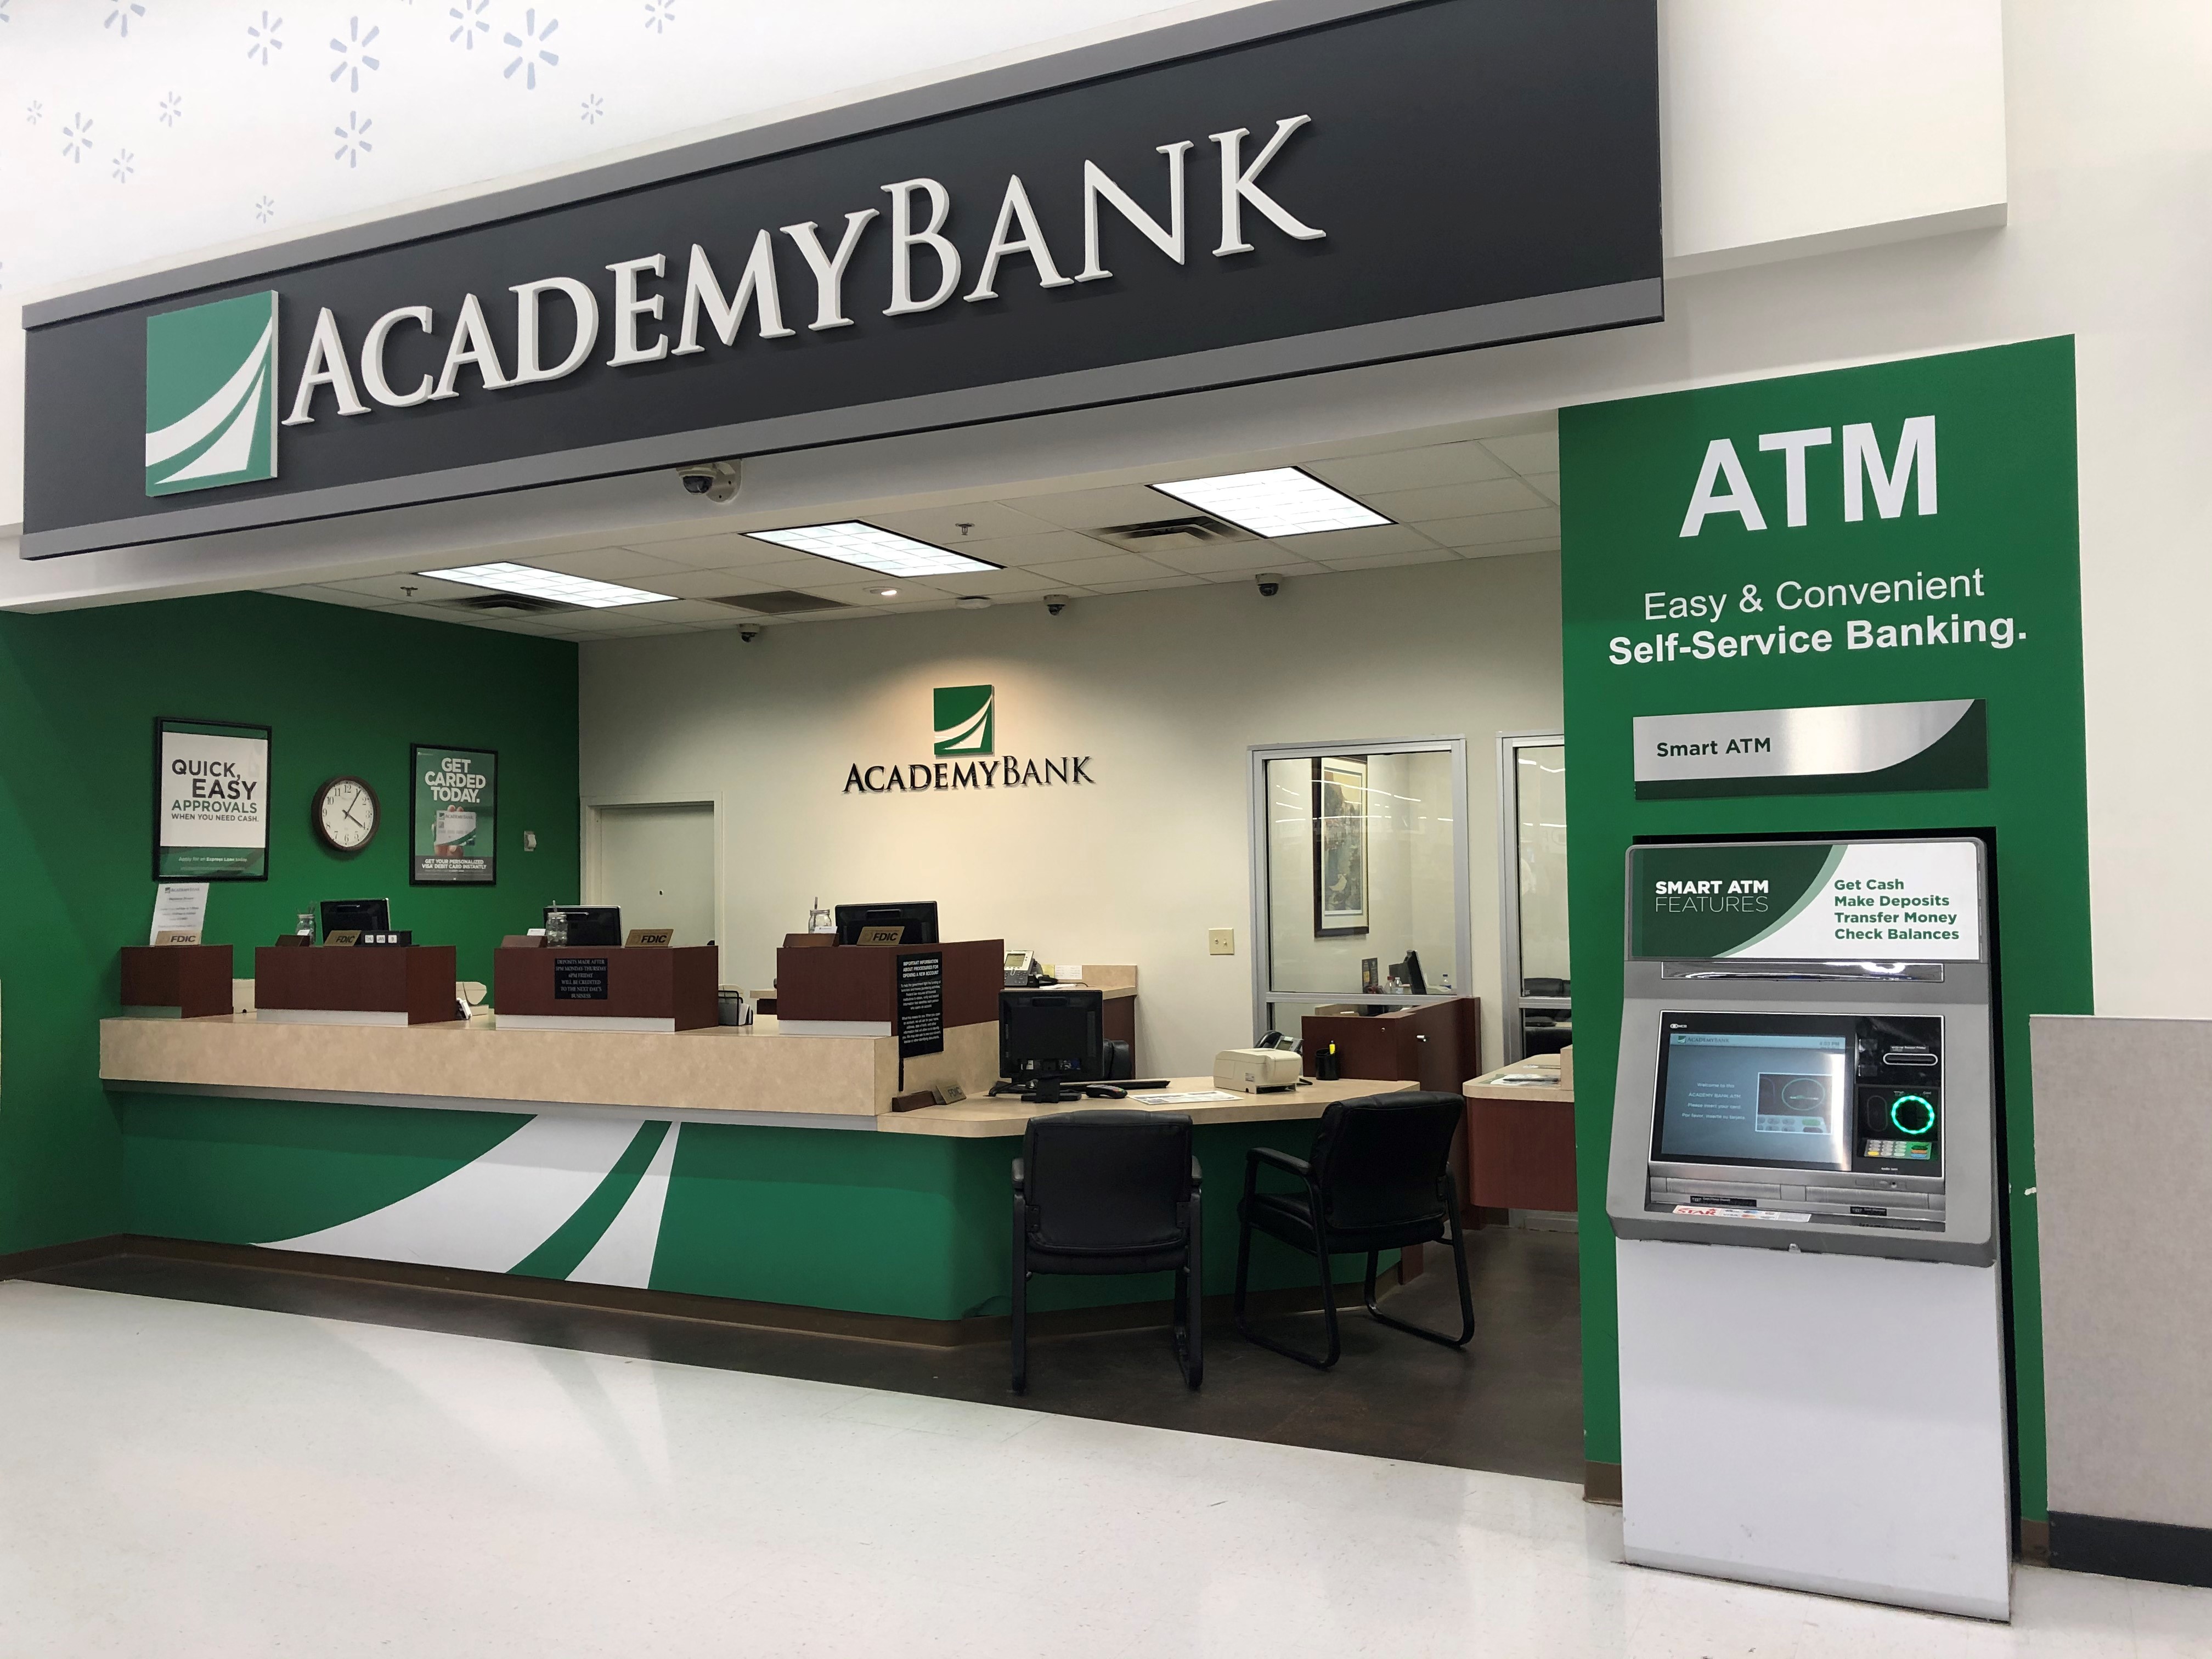 Academy Bank 2021 E Independence St Springfield Mo 65804 - Ypcom